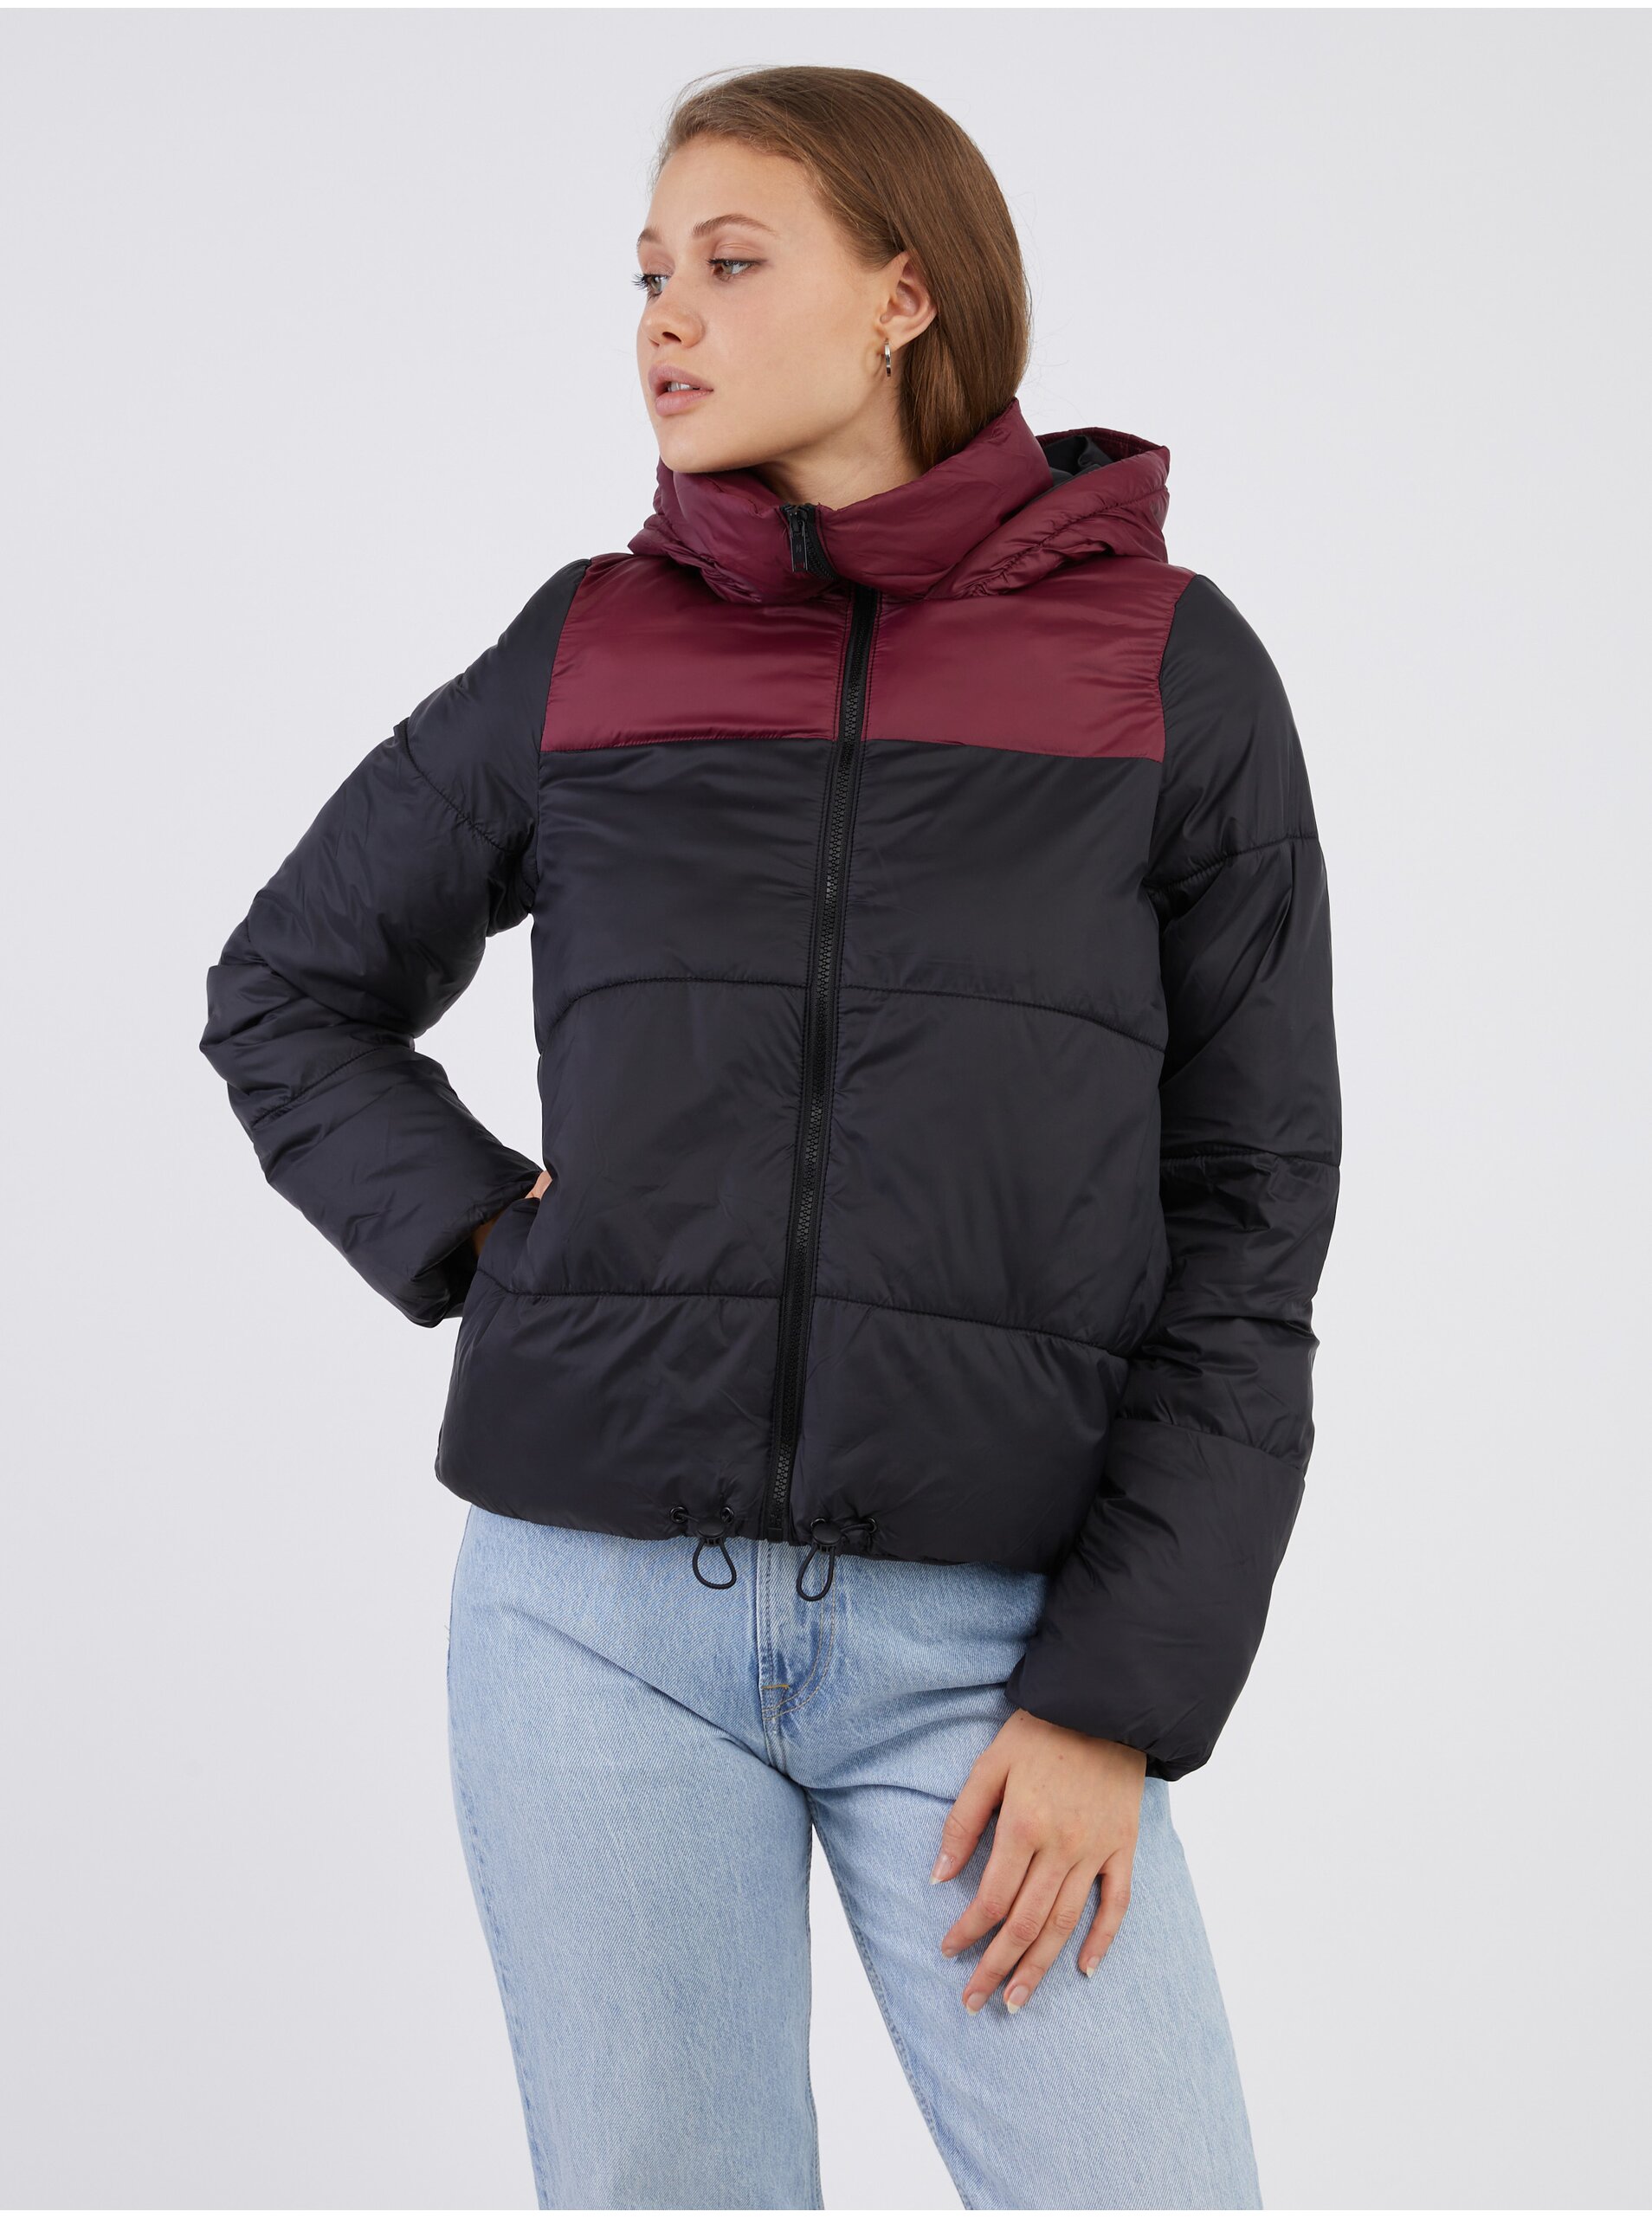 Burgundy-Black Quilted Winter Hooded Jacket Noisy May Ales - Women